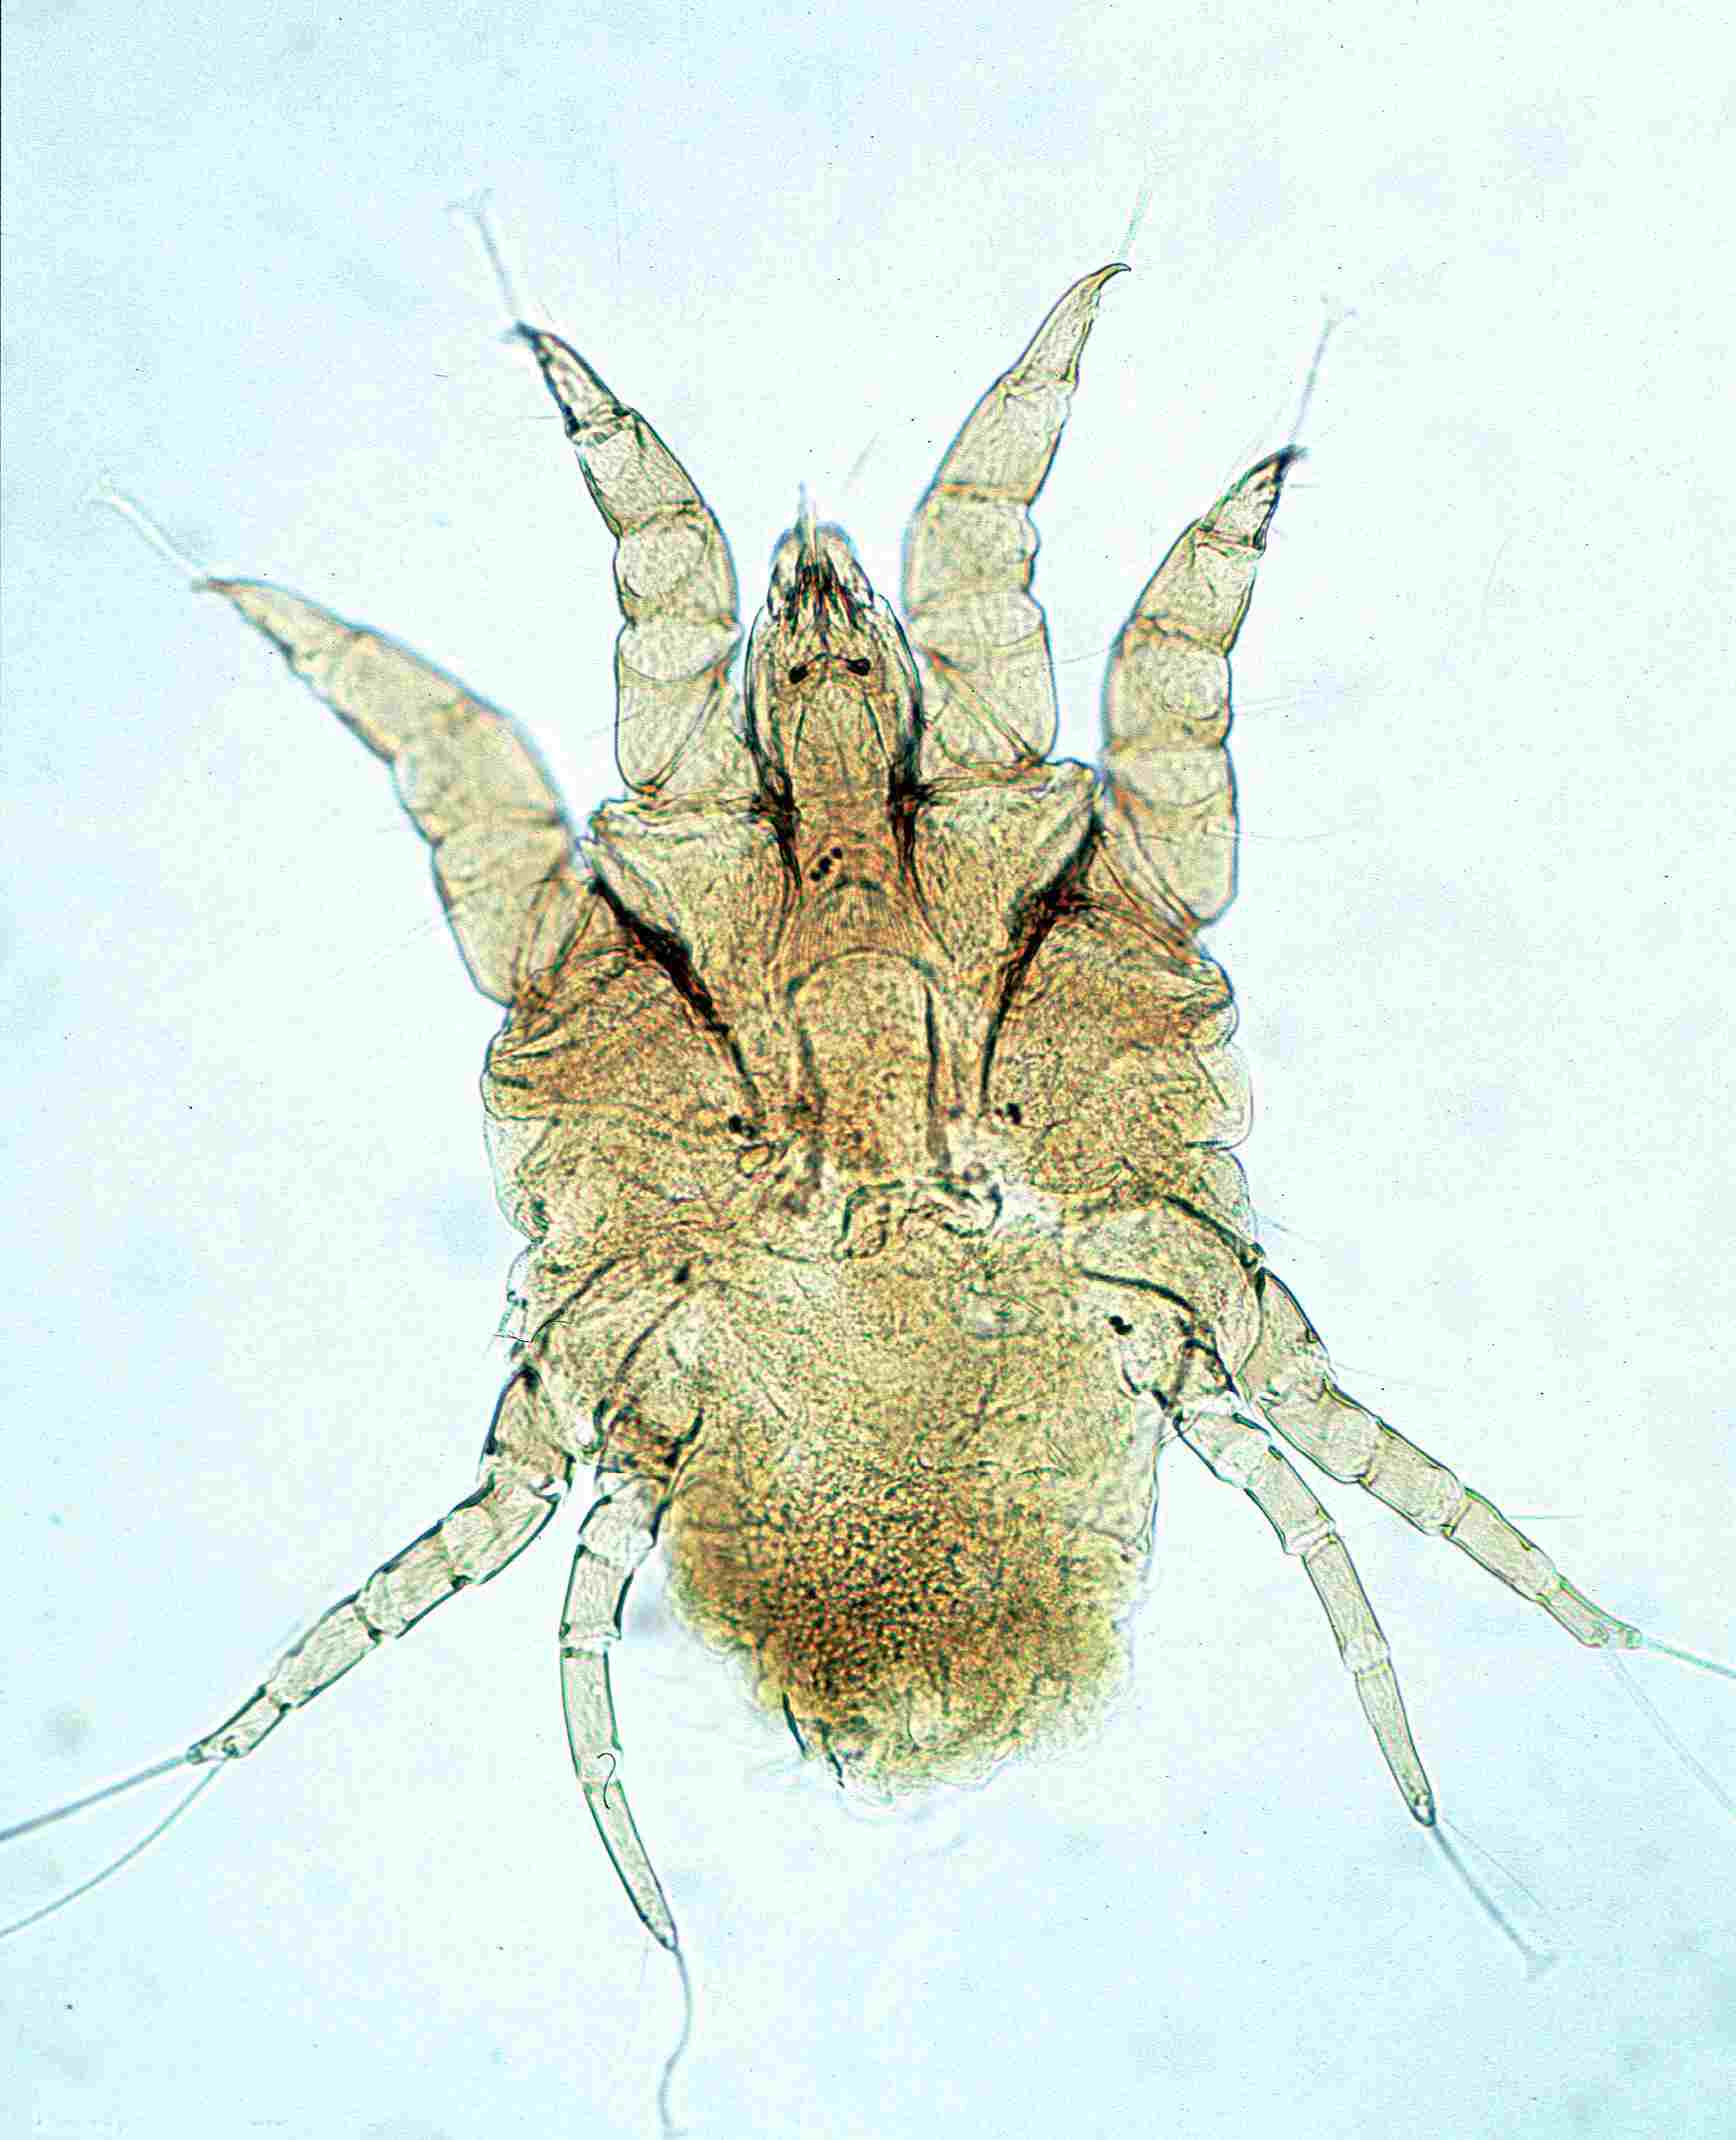 Decomposers in The Tundra: Arctic Mites May Exhibit Detritivorous Feeding Behavior (Credit: Alan R Walker 2012 .CC BY-SA 3.0.)